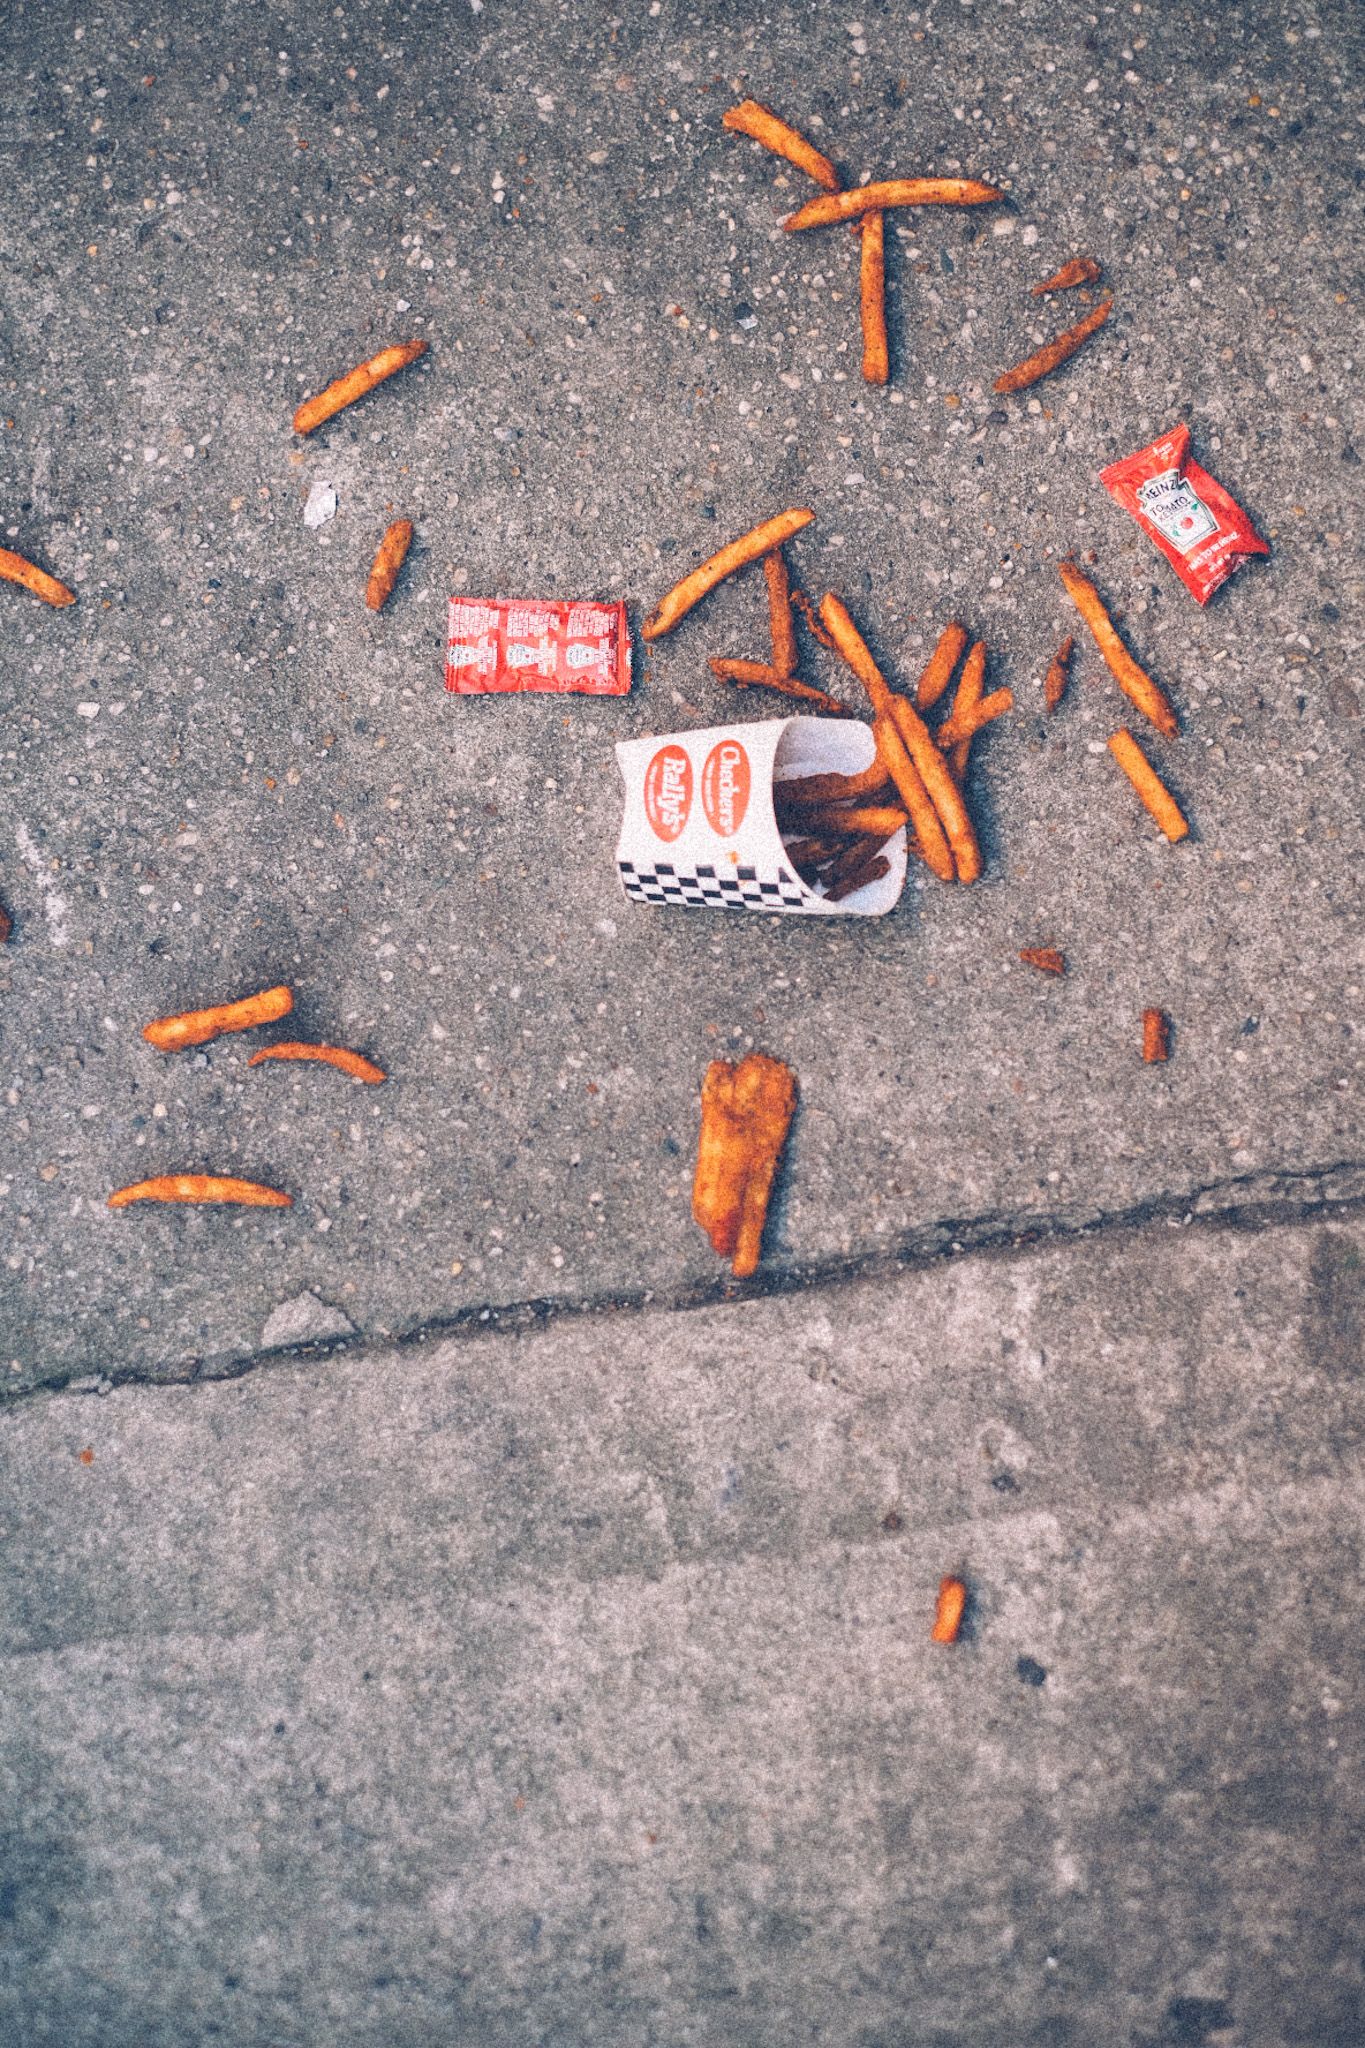 A sleeve of French fries has spilled on a concrete sidewalk, splaying out in all directions. Ketchup packets lie nearby. The black and white and red fry sleeve says Checkers.